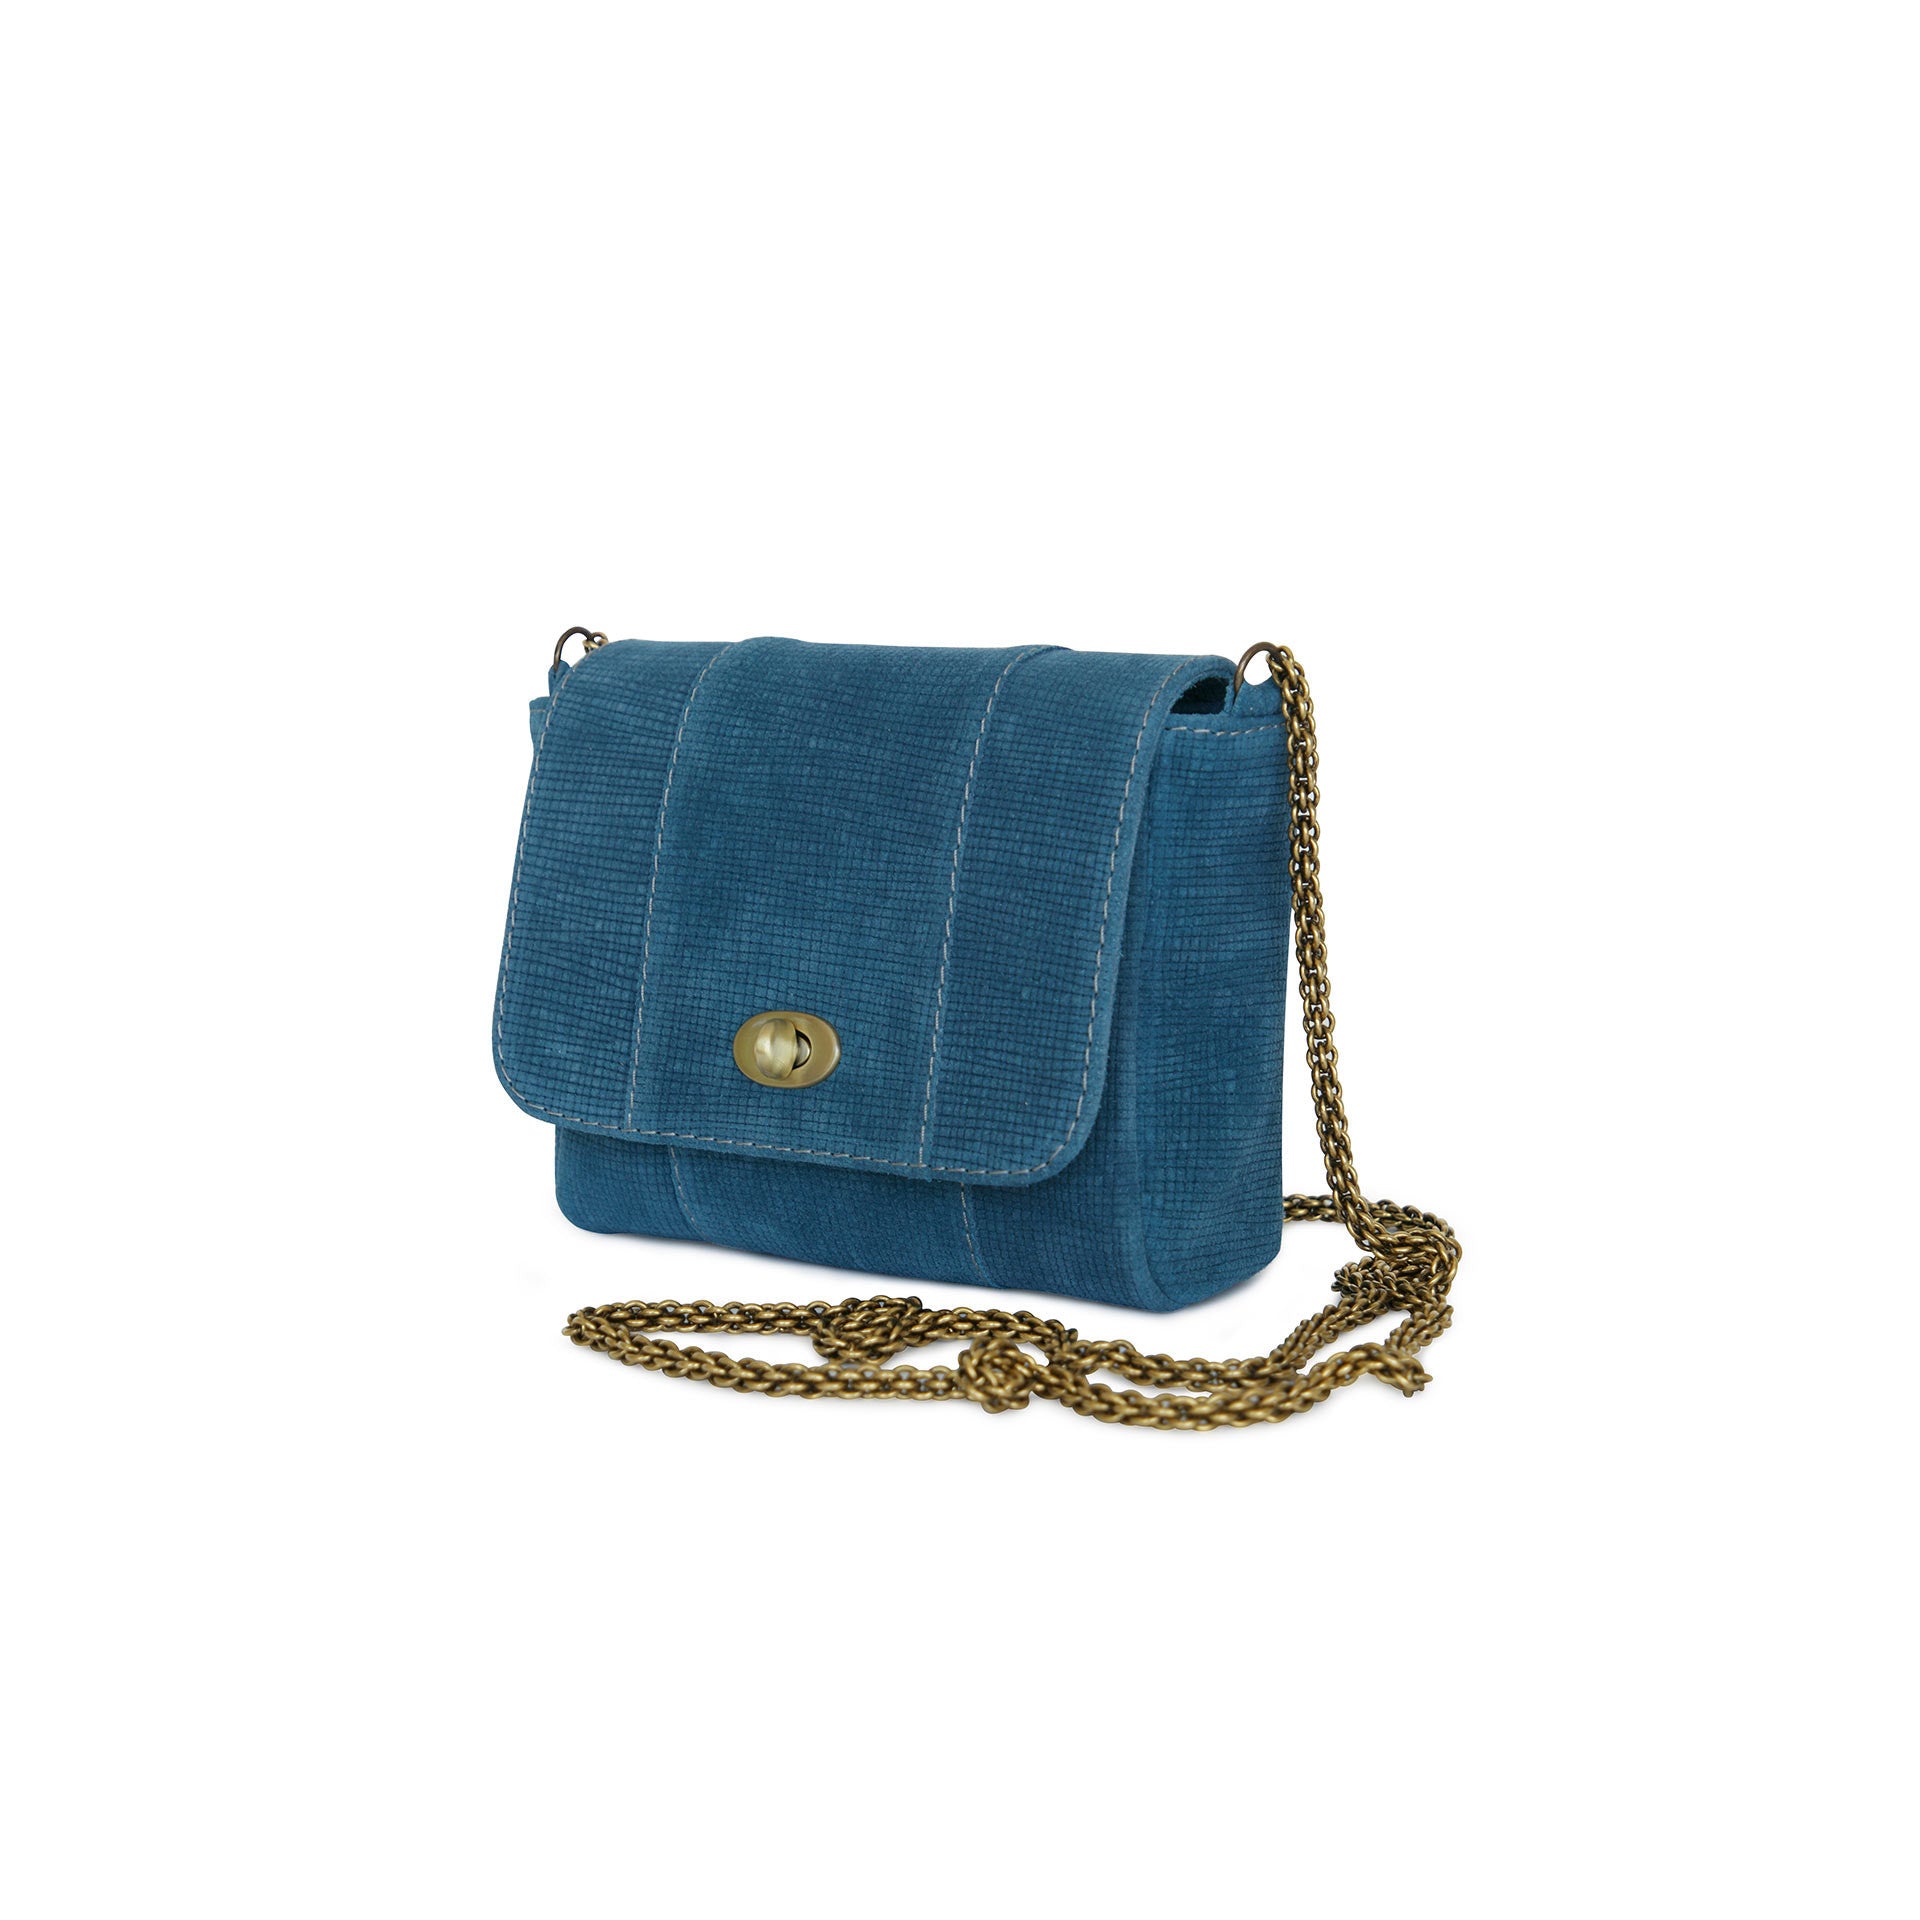 The side look of the crossbody bag Marina by Philini